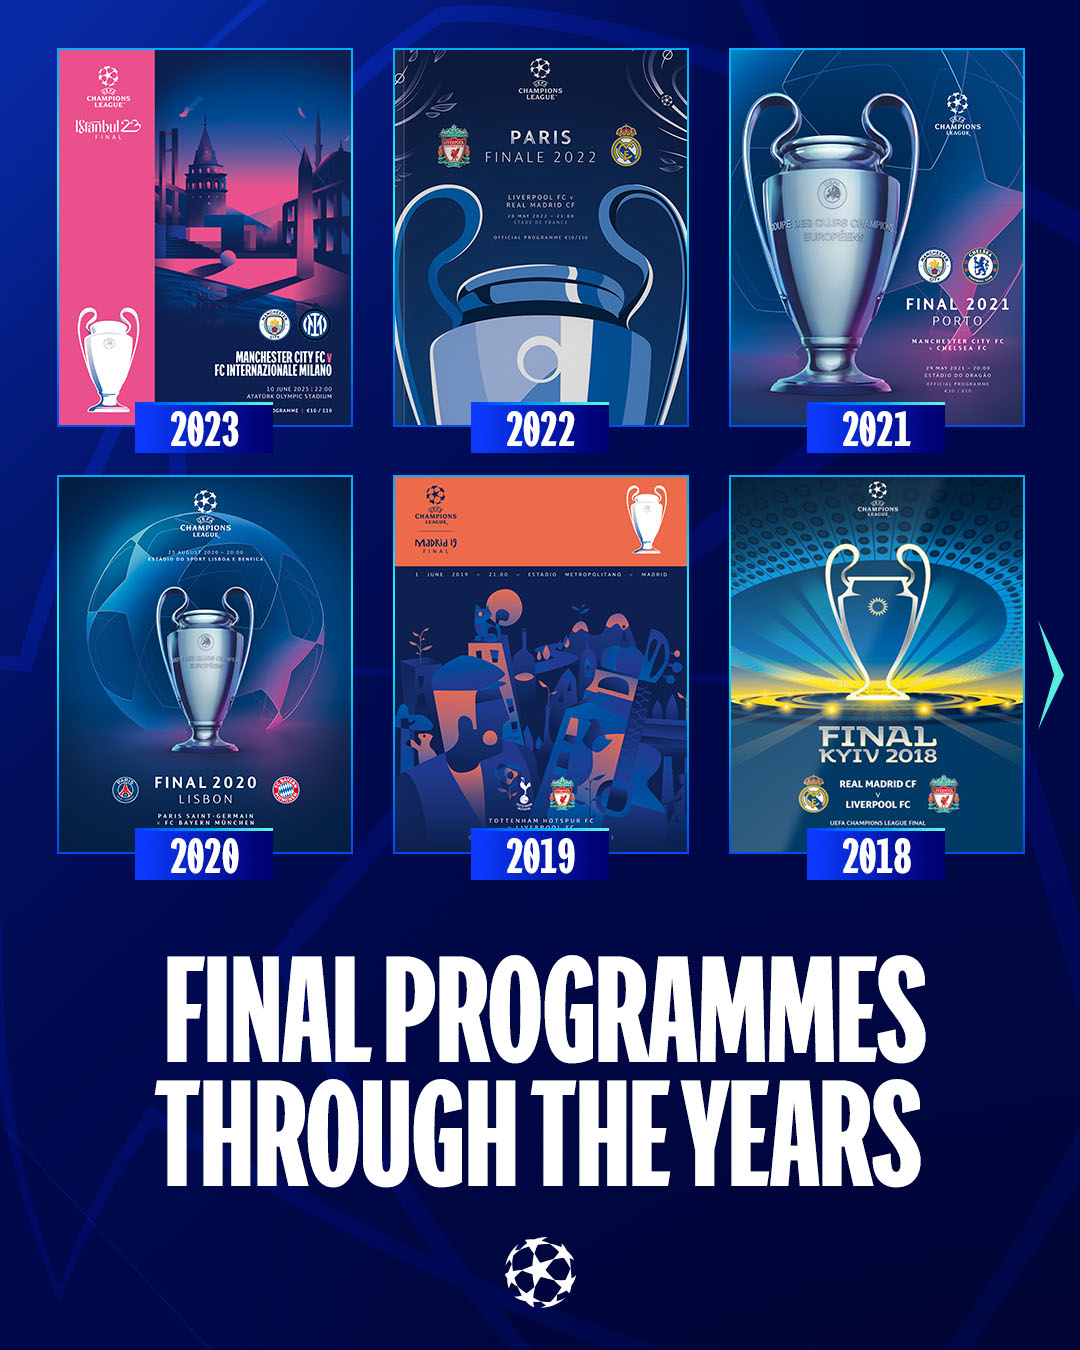 UEFA Champions League on Twitter: "Final programmes through the years 😍  #UCLfinal https://t.co/LyBoKmou2G" / Twitter